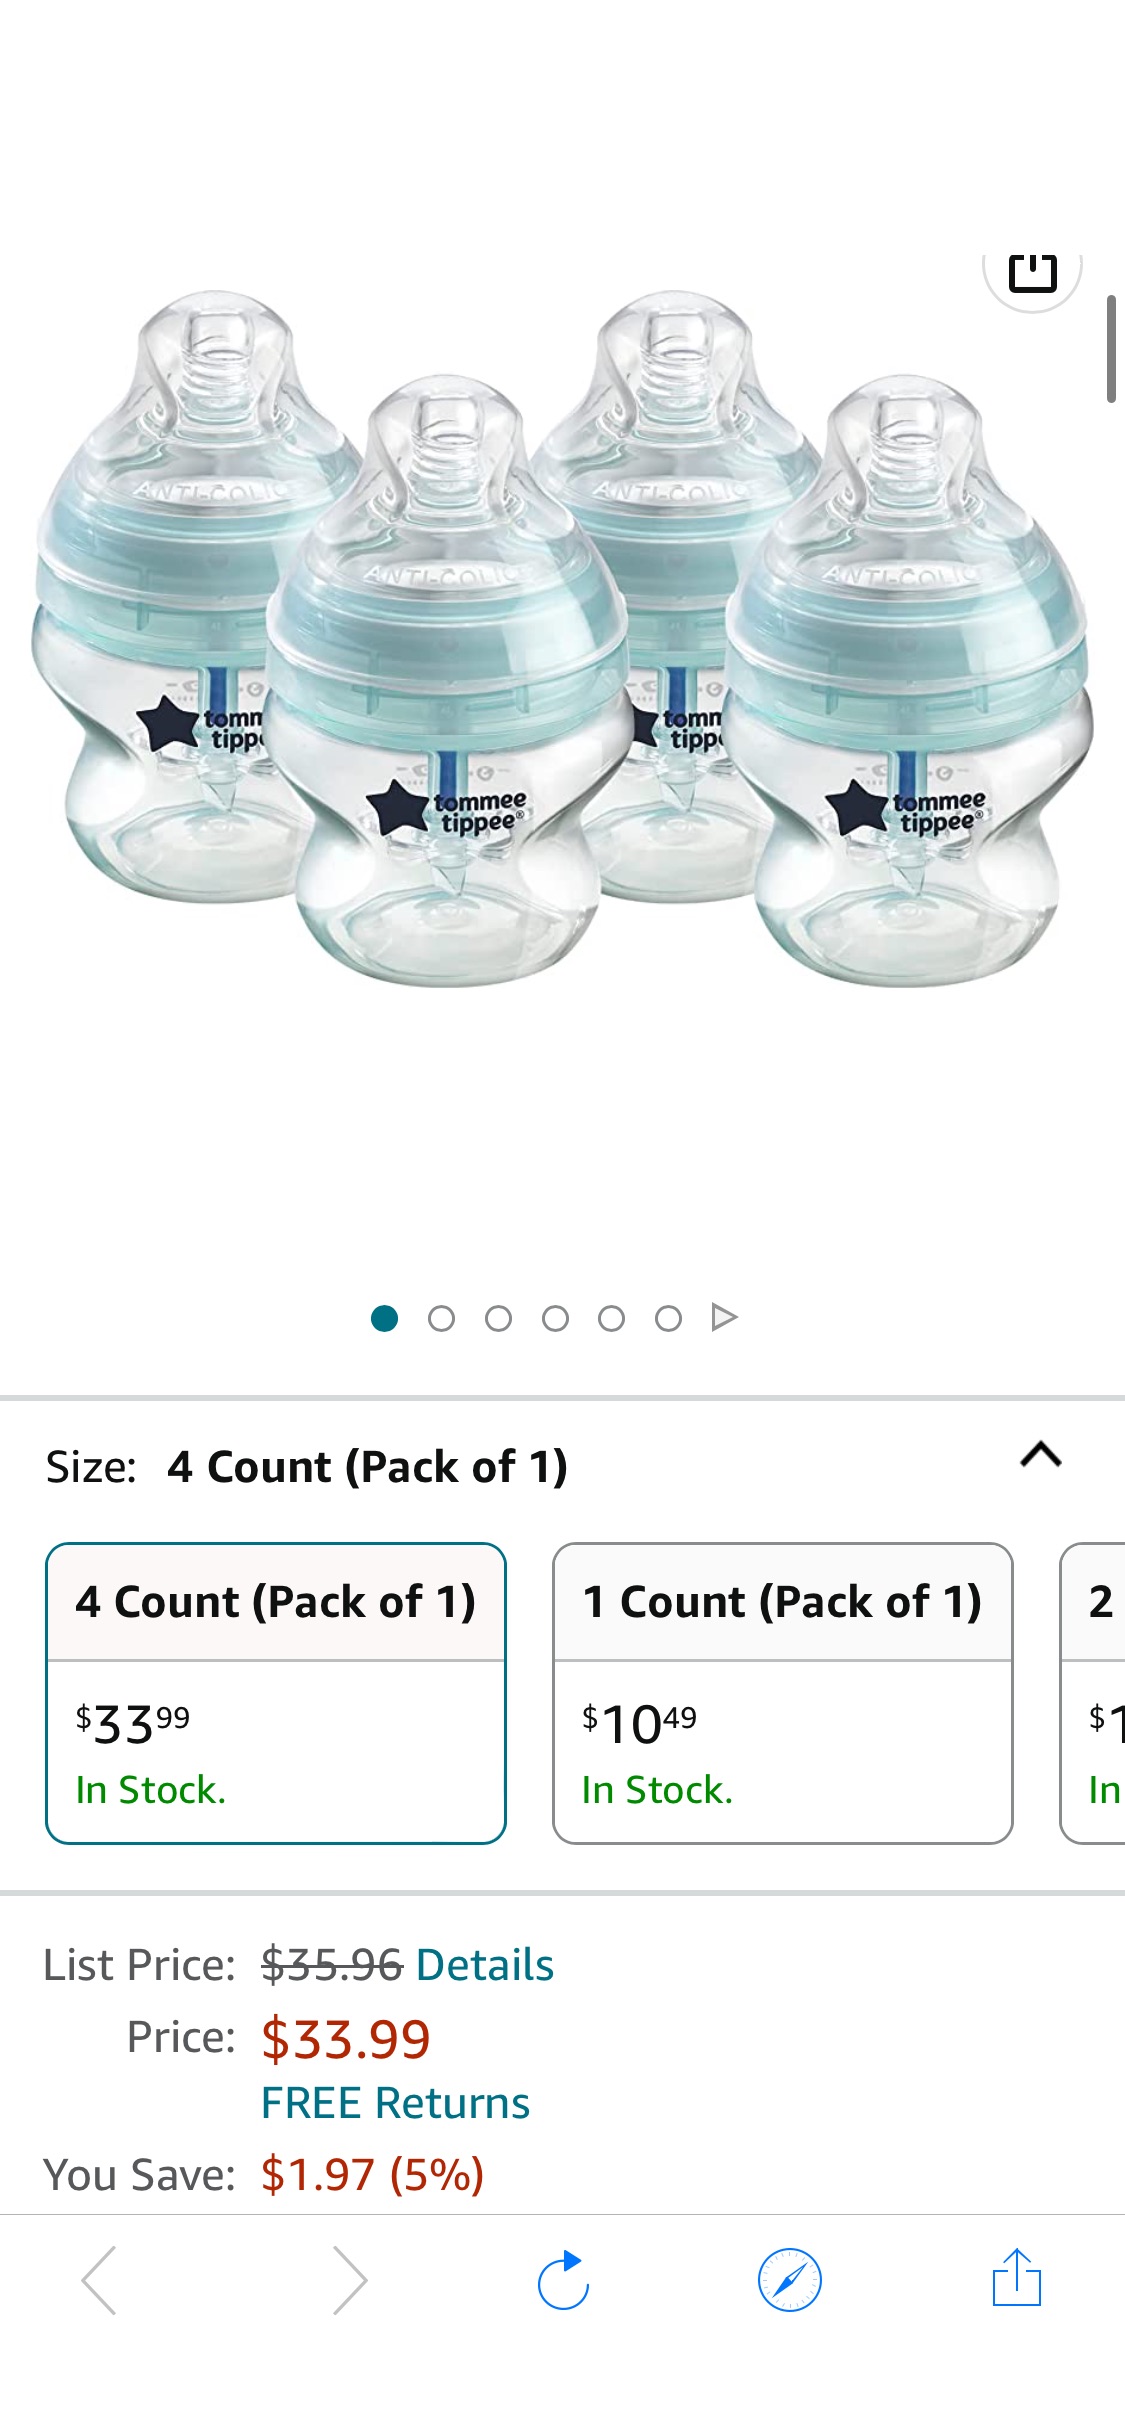 Amazon.com : Tommee Tippee Anti-Colic Baby Bottles, Slow Flow Breast-Like Nipple and Unique Anti-Colic Venting System (5oz, 4 Count) : Baby